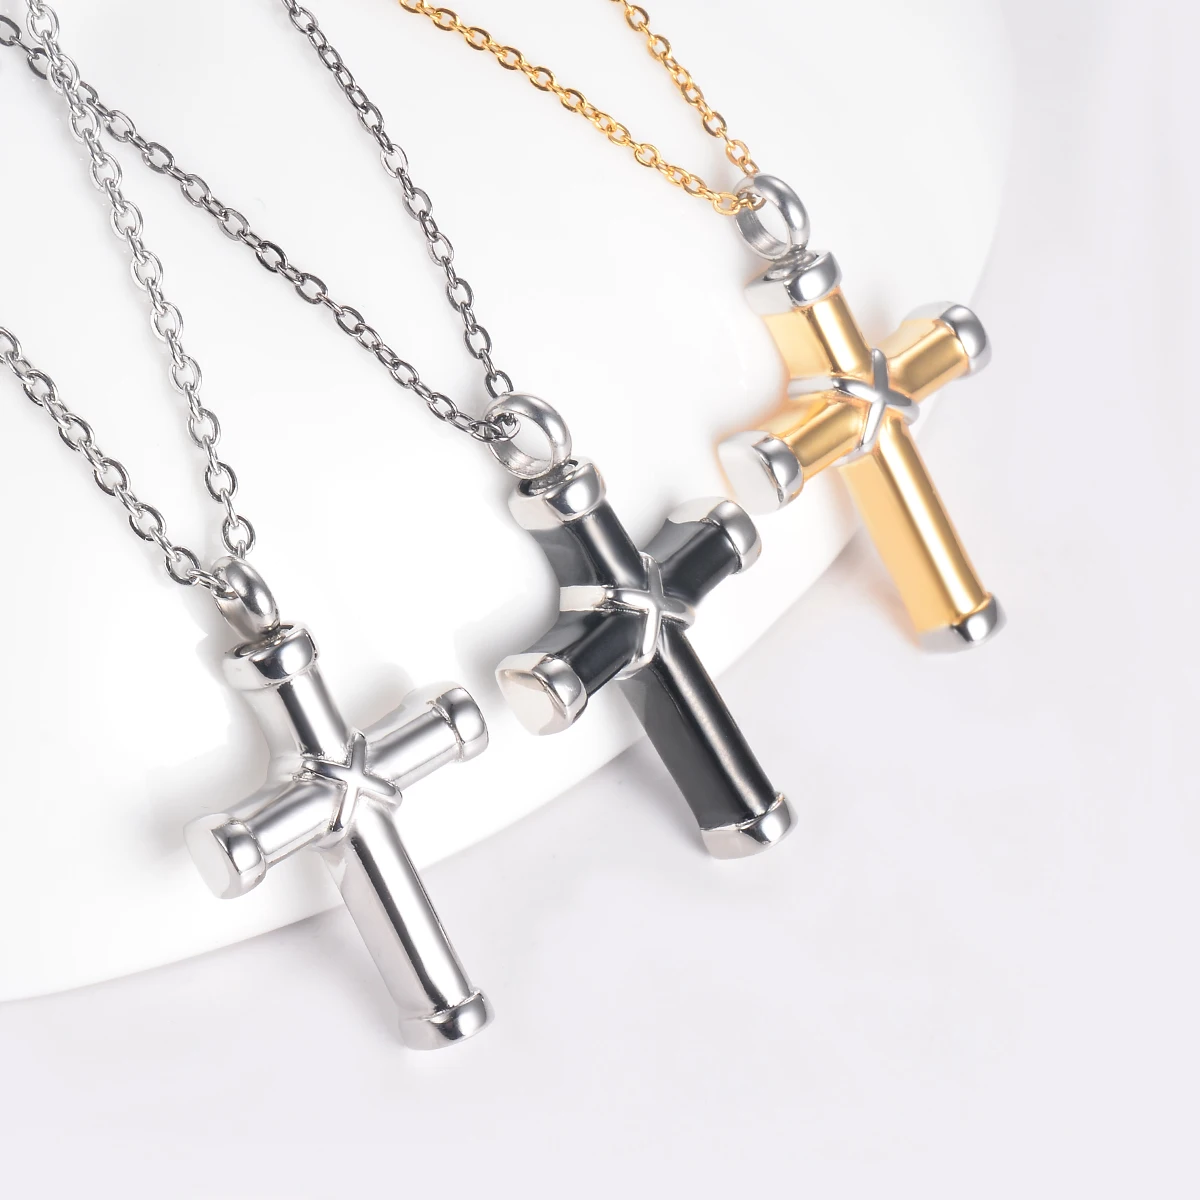 Stainless Steel Cross Memorial Cremation Ashes Urn Pendant Necklace Keepsake Jewelry Urn 